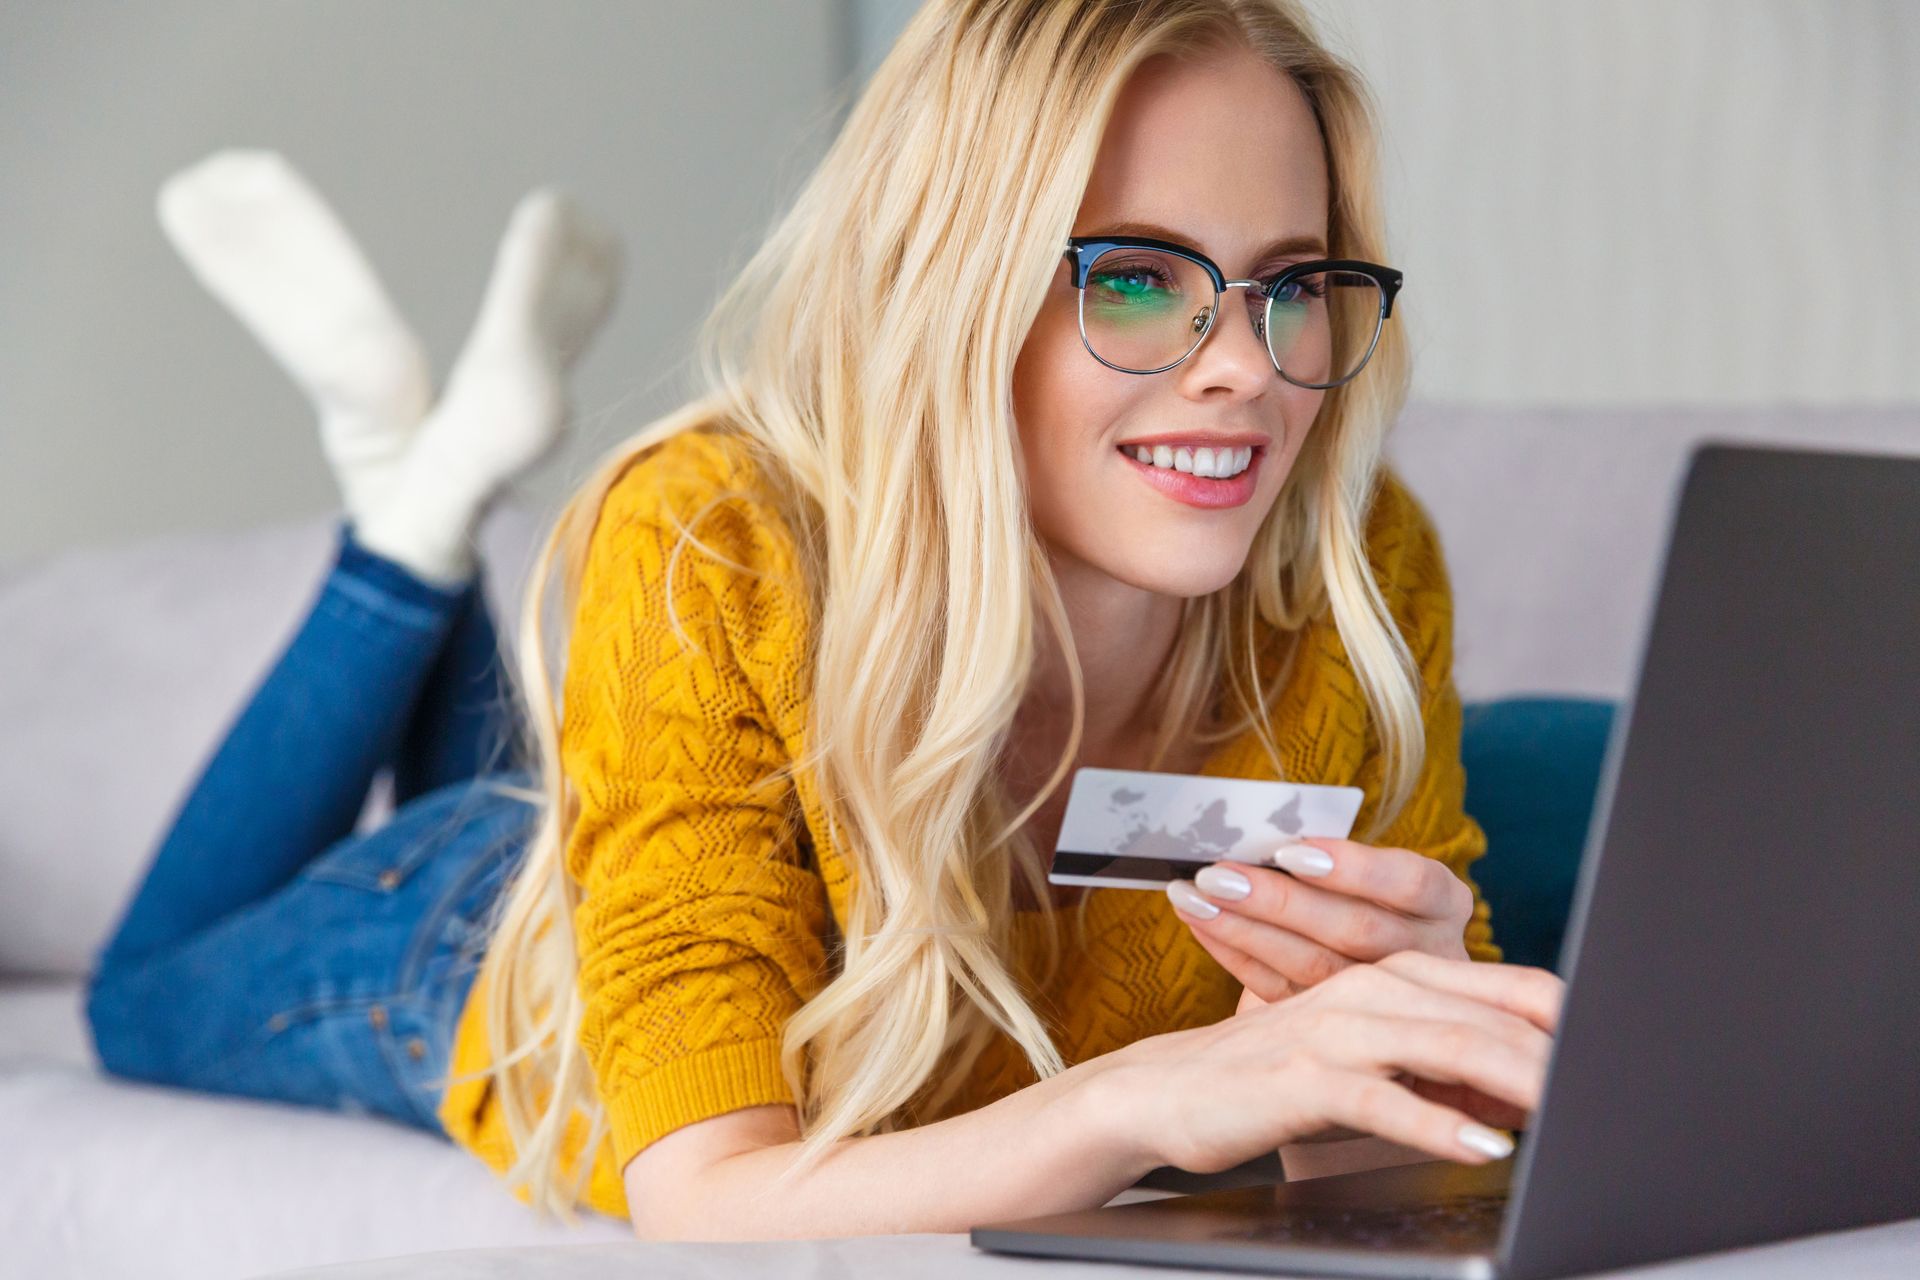 a woman is using a laptop while holding a credit card